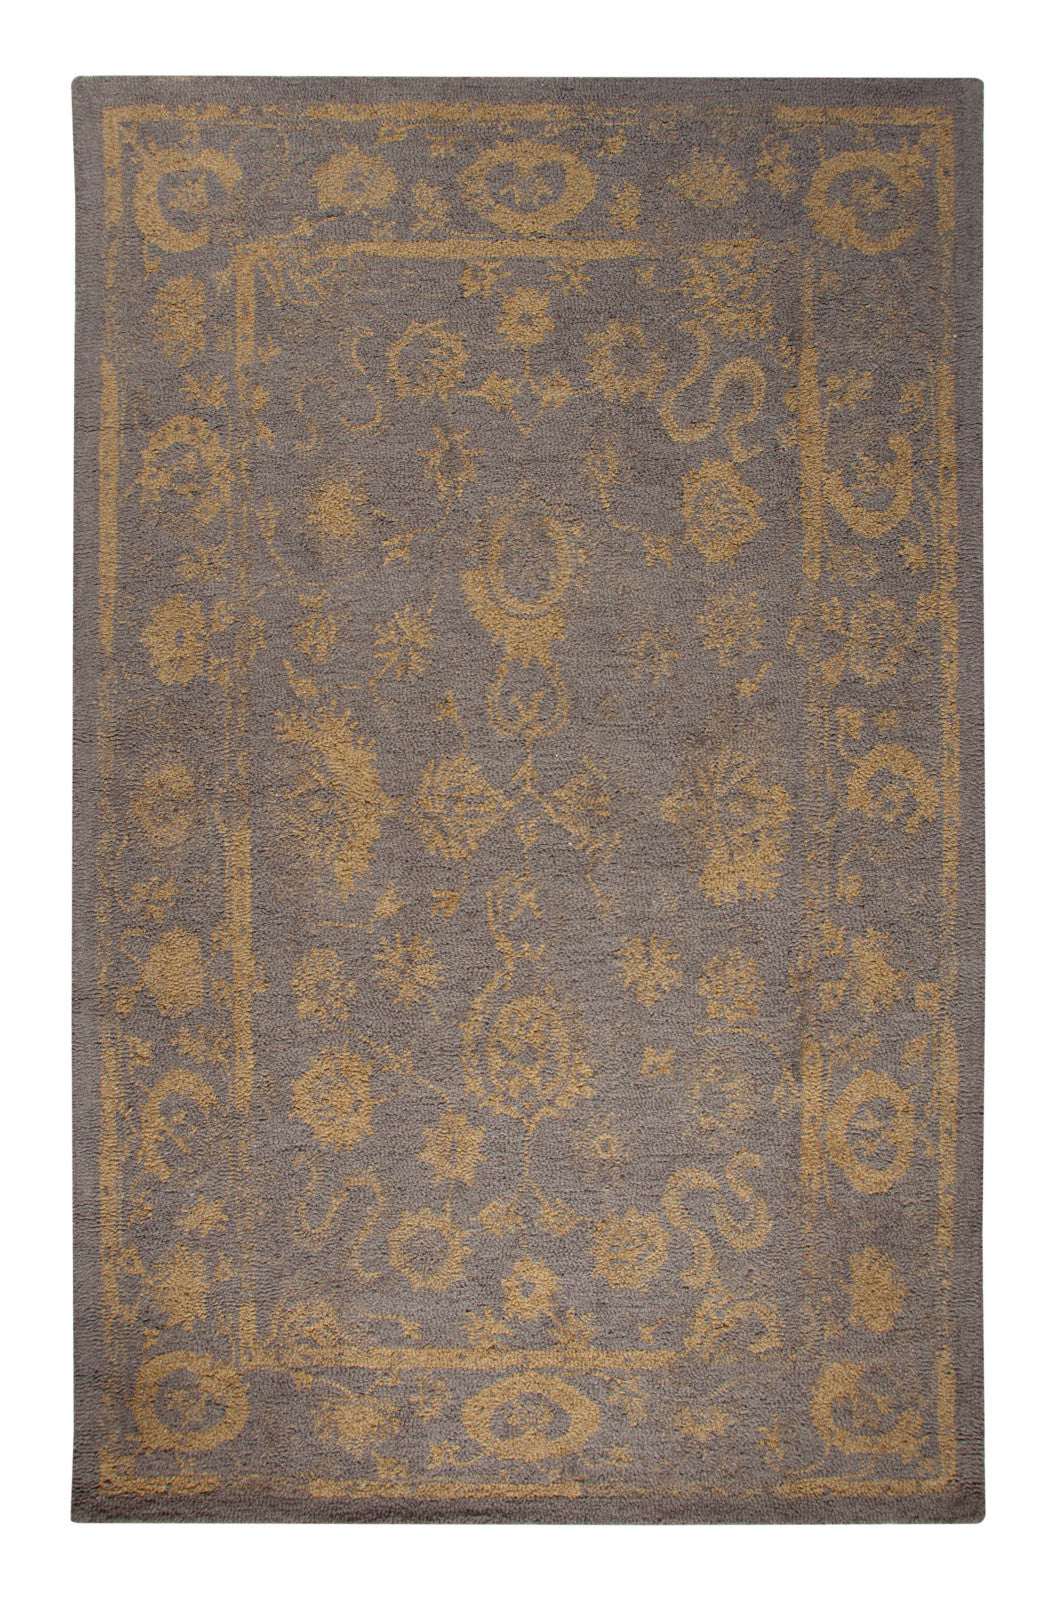 Dynamic Rugs Avalon 88800 Brown/Gold Area Rug main image